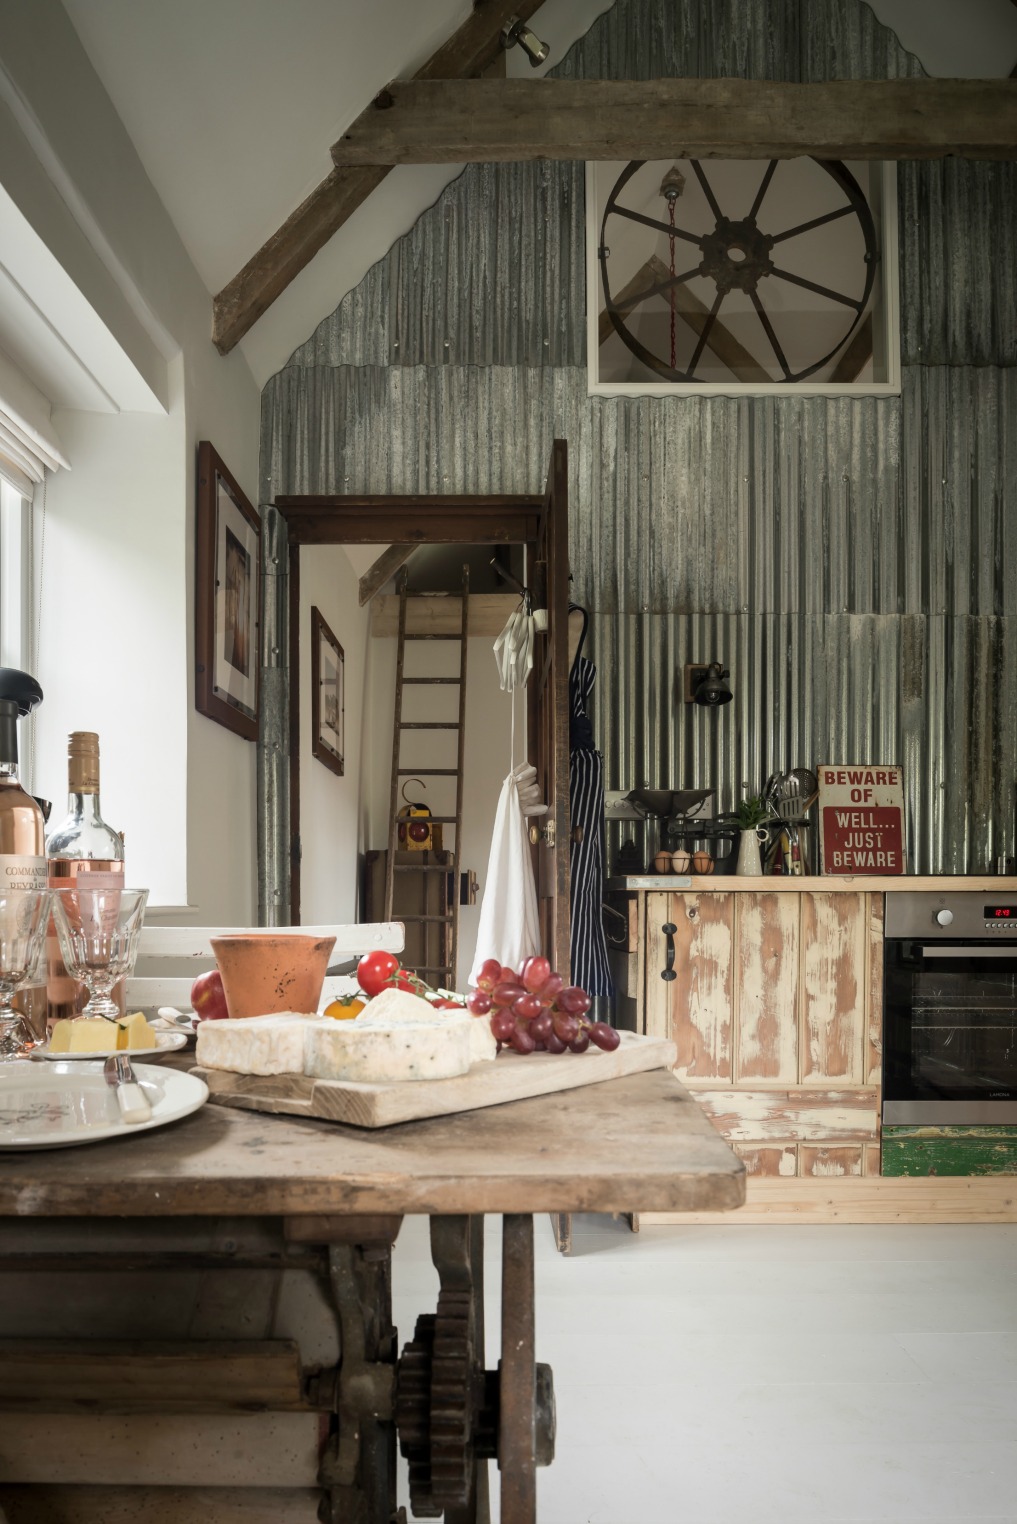 This stunning cottage is filled with vintage finds and industrial style - love the metal wall kellyelko.com